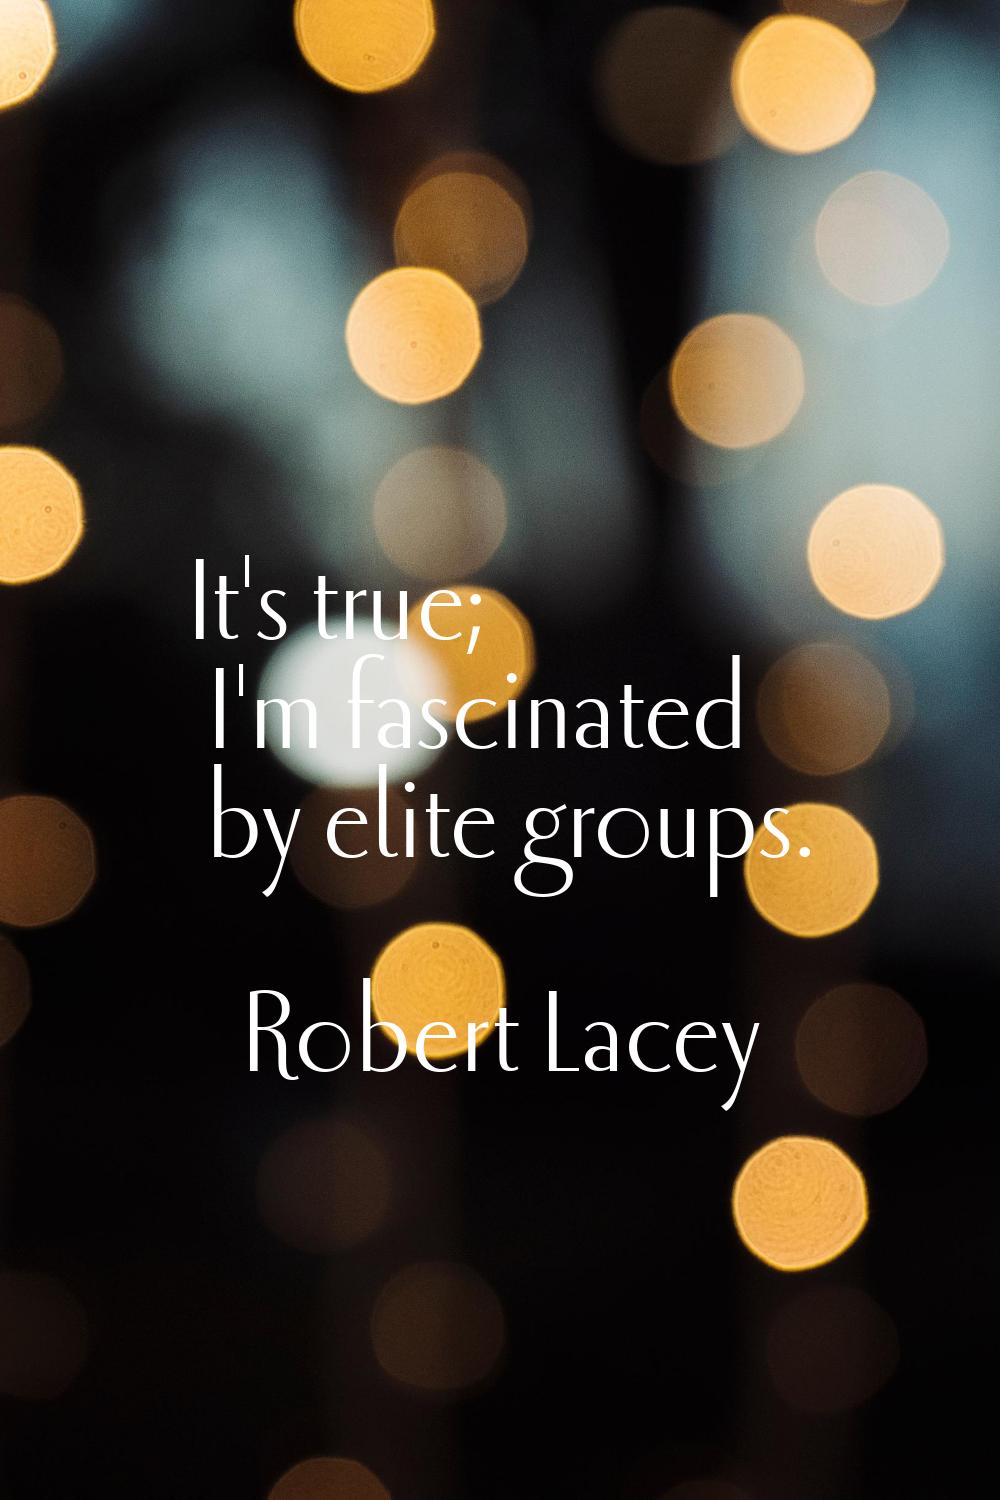 It's true; I'm fascinated by elite groups.